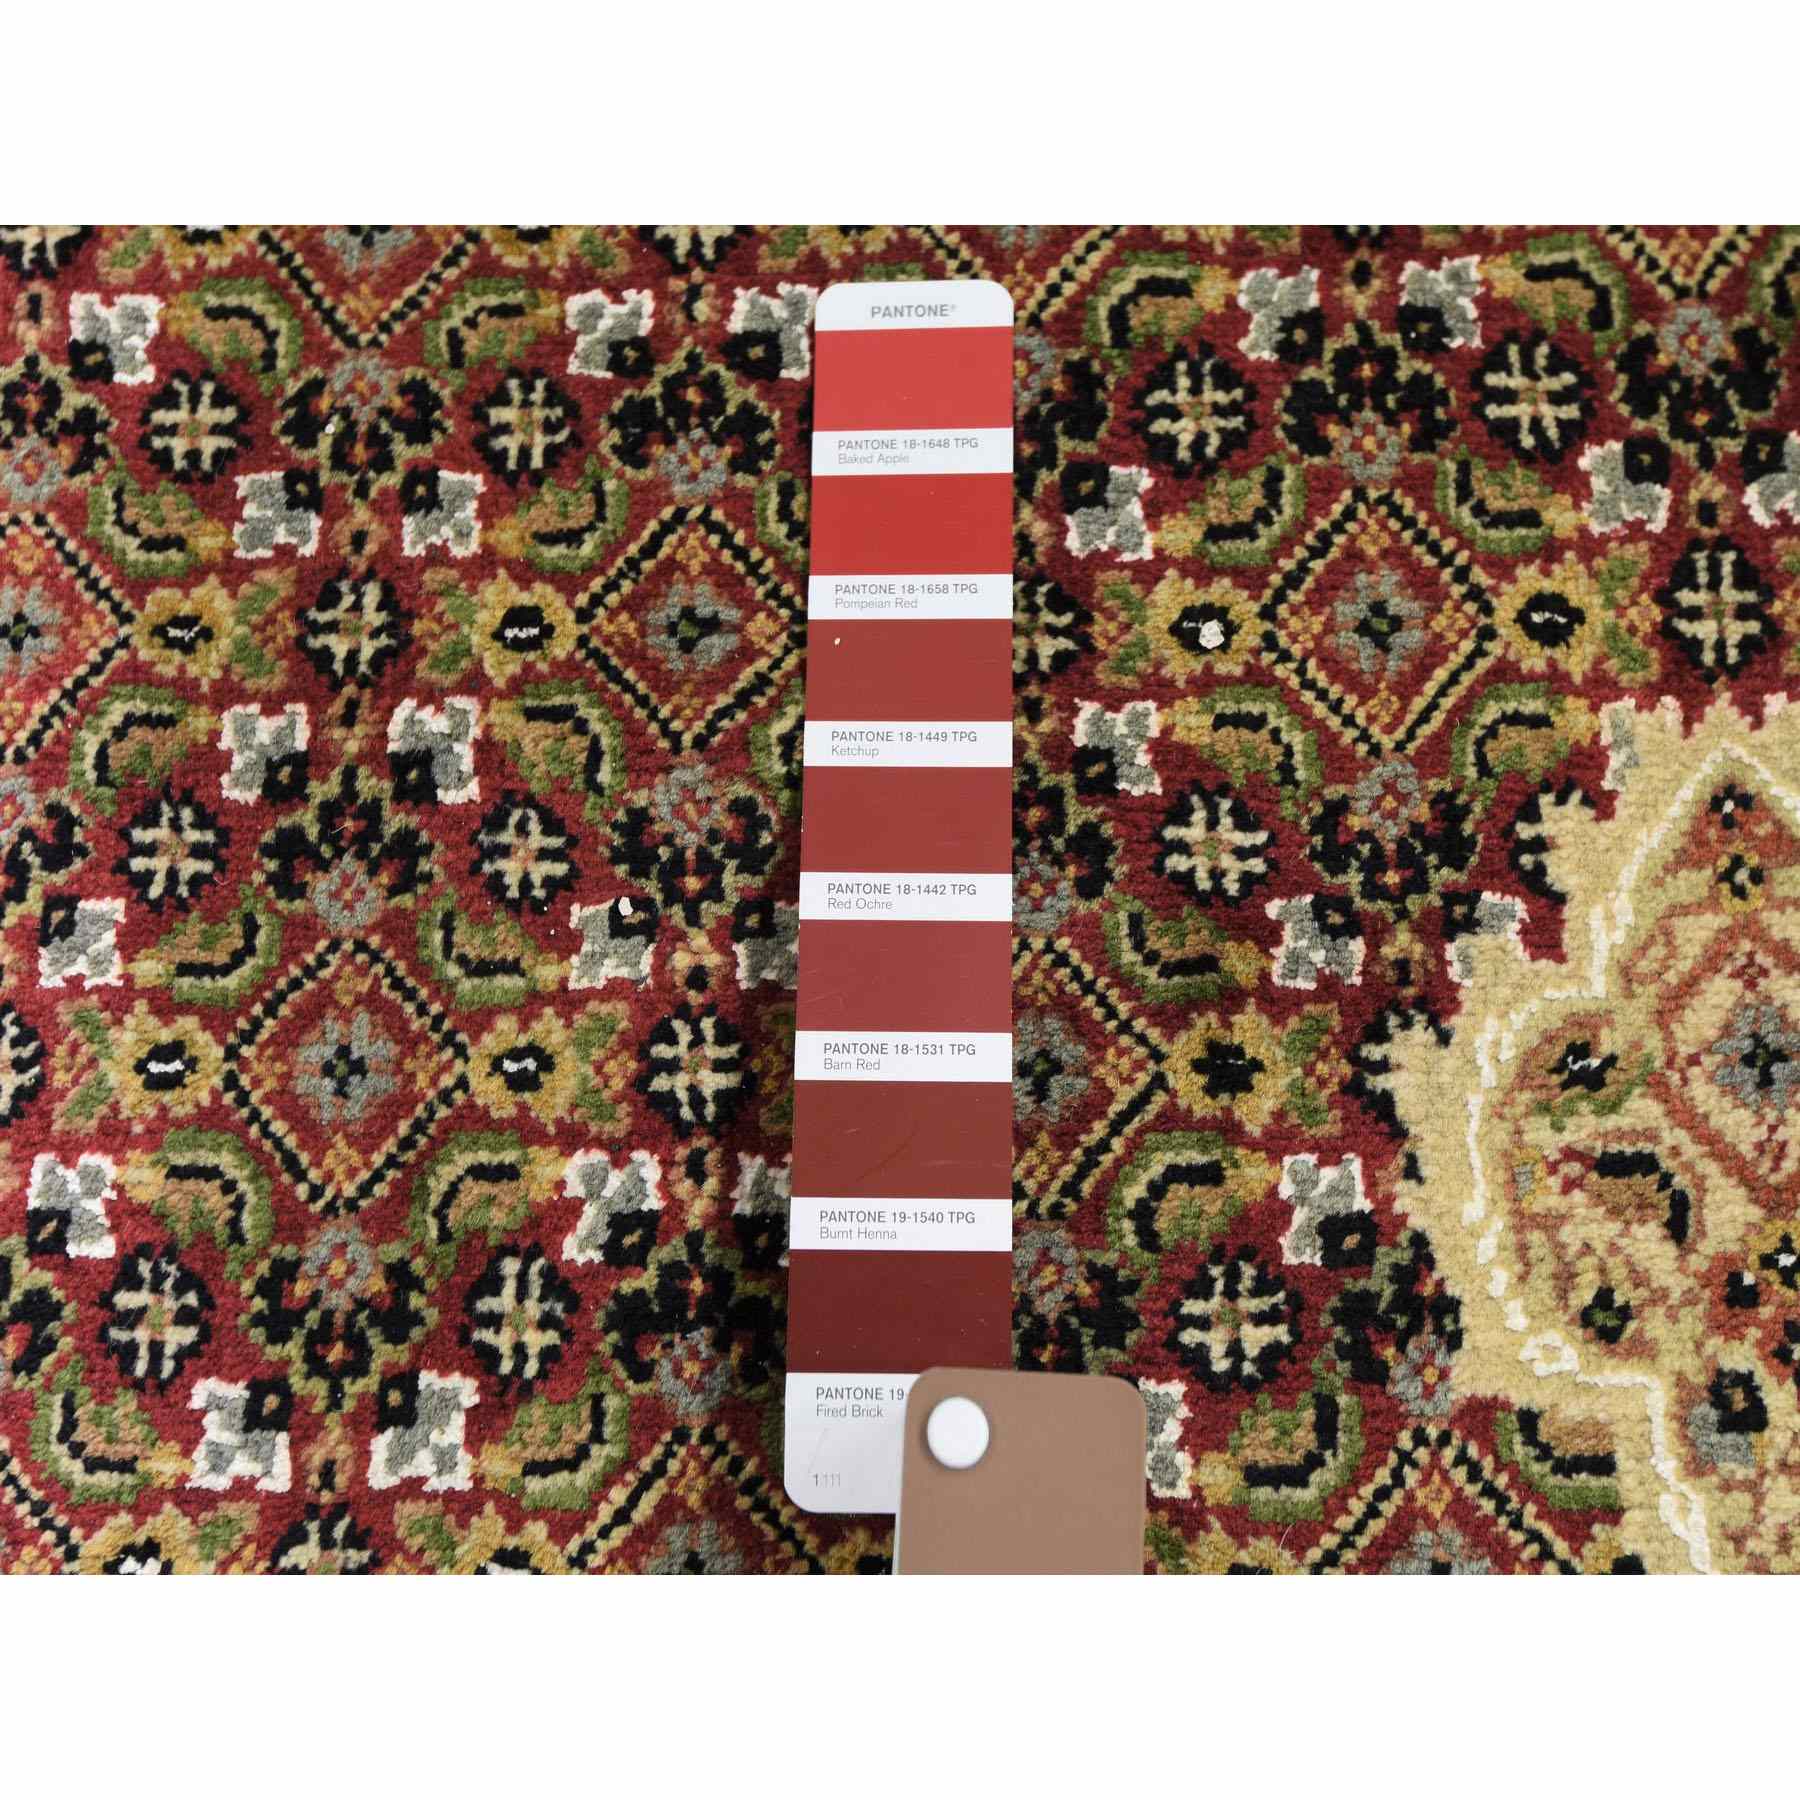 Fine-Oriental-Hand-Knotted-Rug-245230